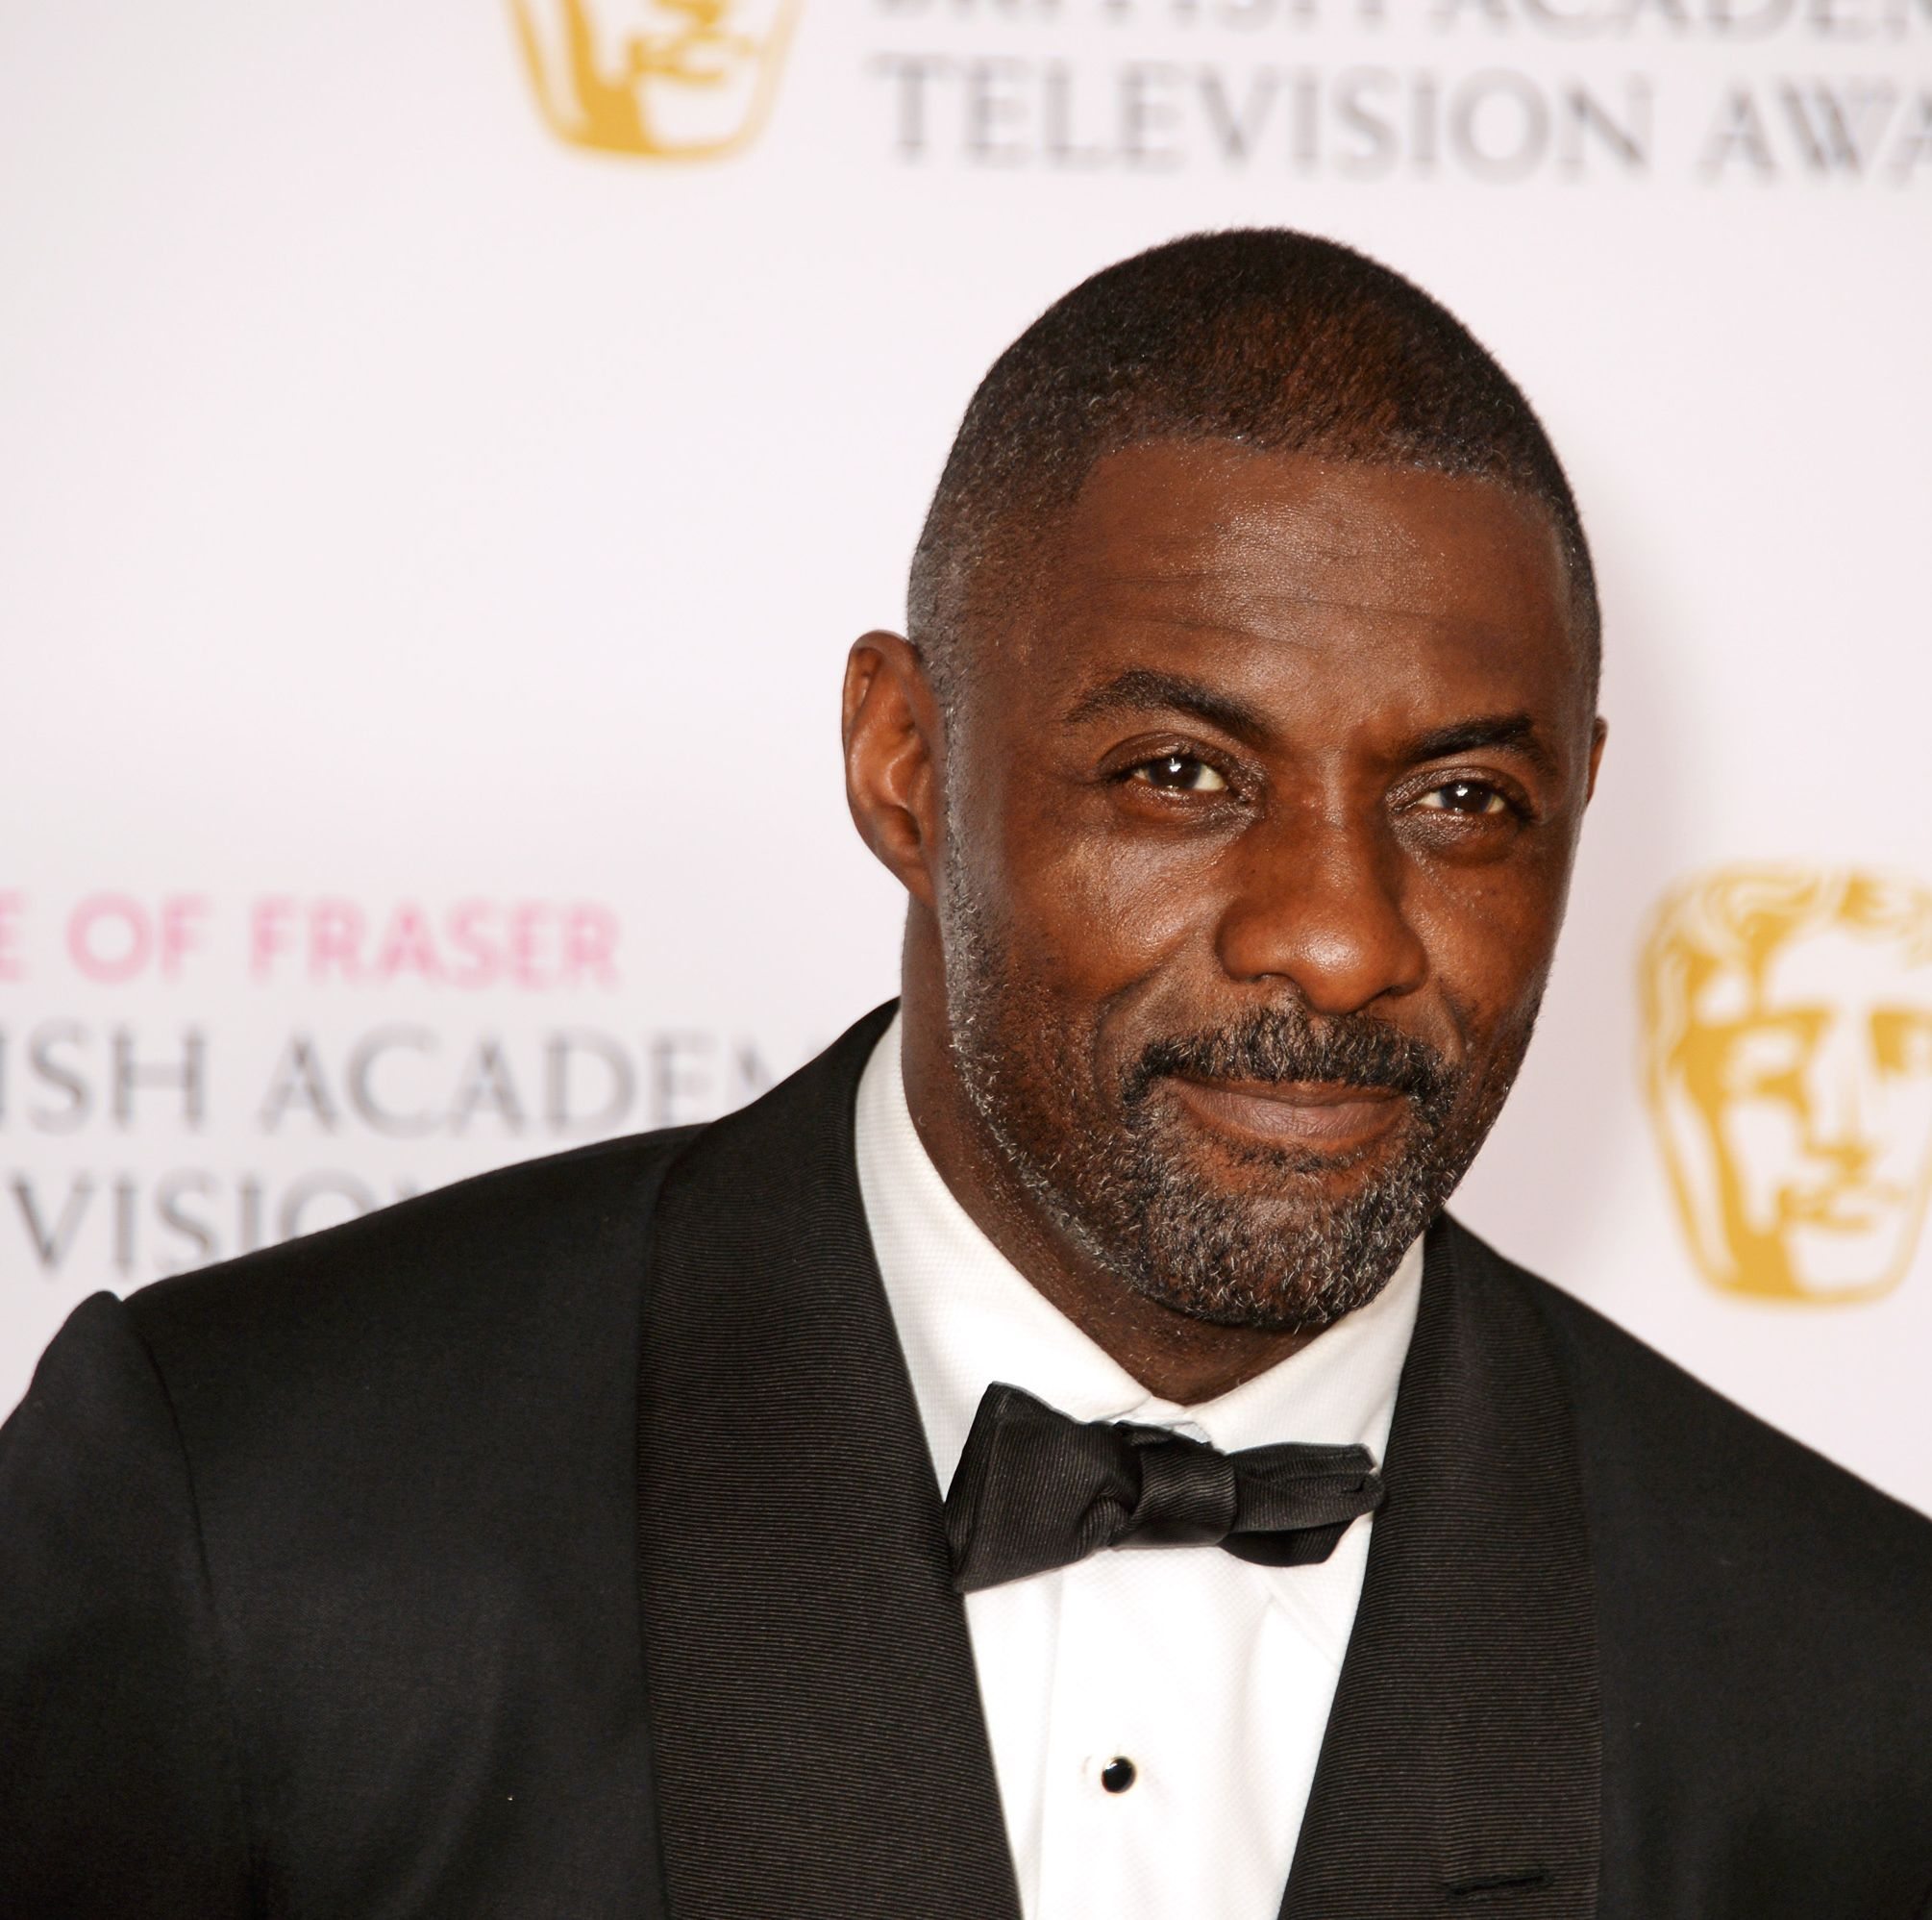 A James Bond Producer Says Idris Elba Is 'Part of the Conversation' to Be the Next 007